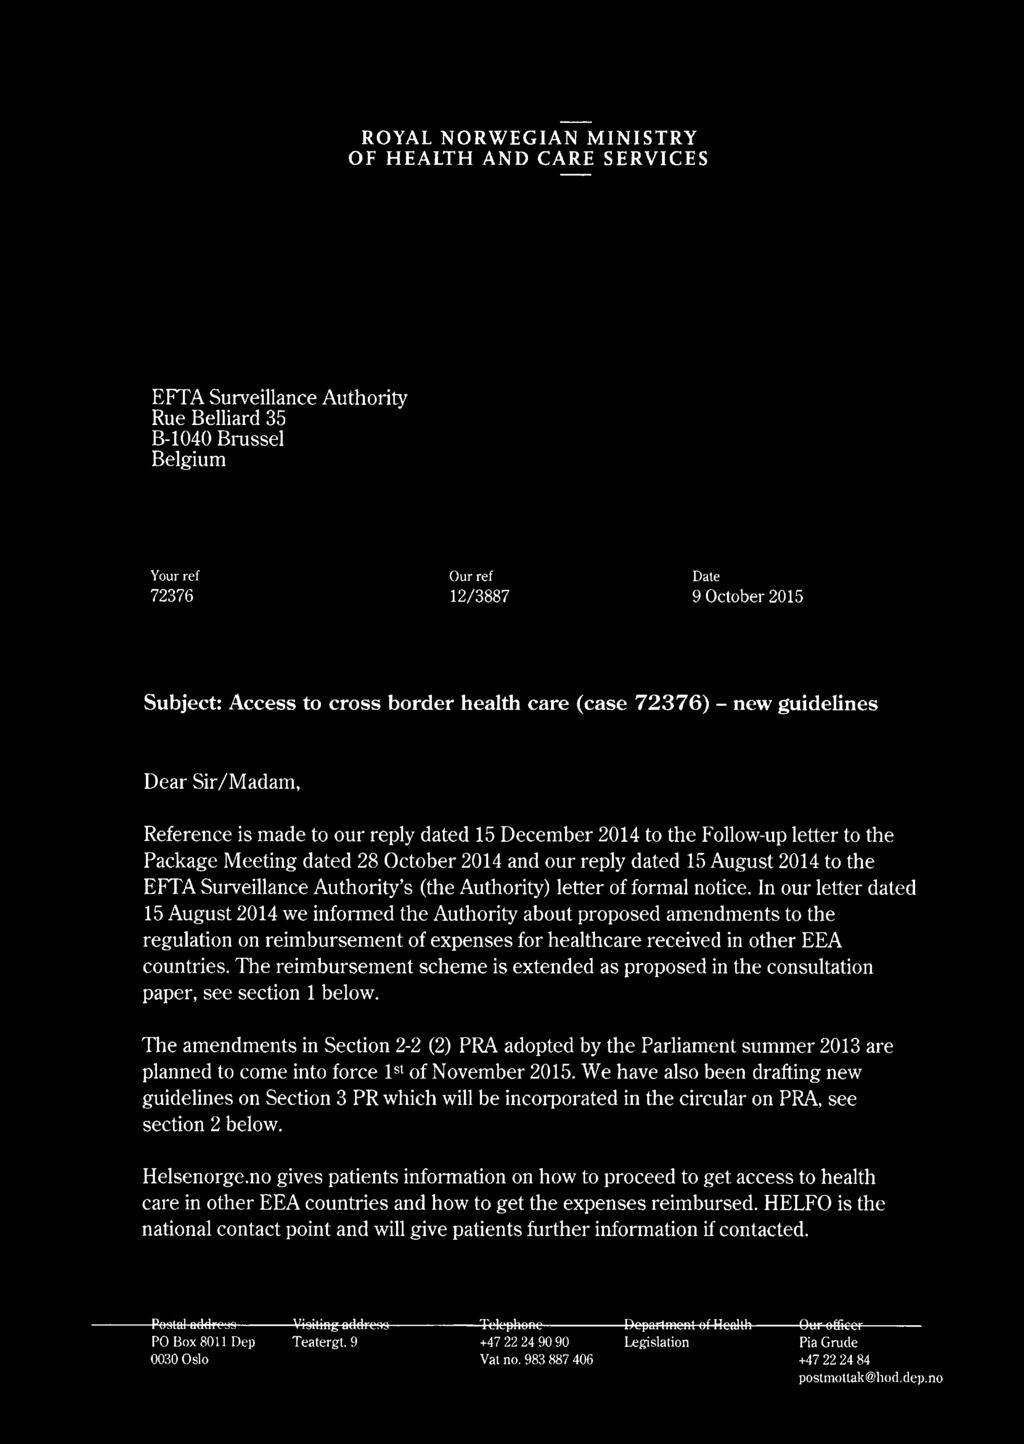 our reply dated 15 August 2014 to the EFTA Surveillance Authority s (the Authority) letter of formal notice.